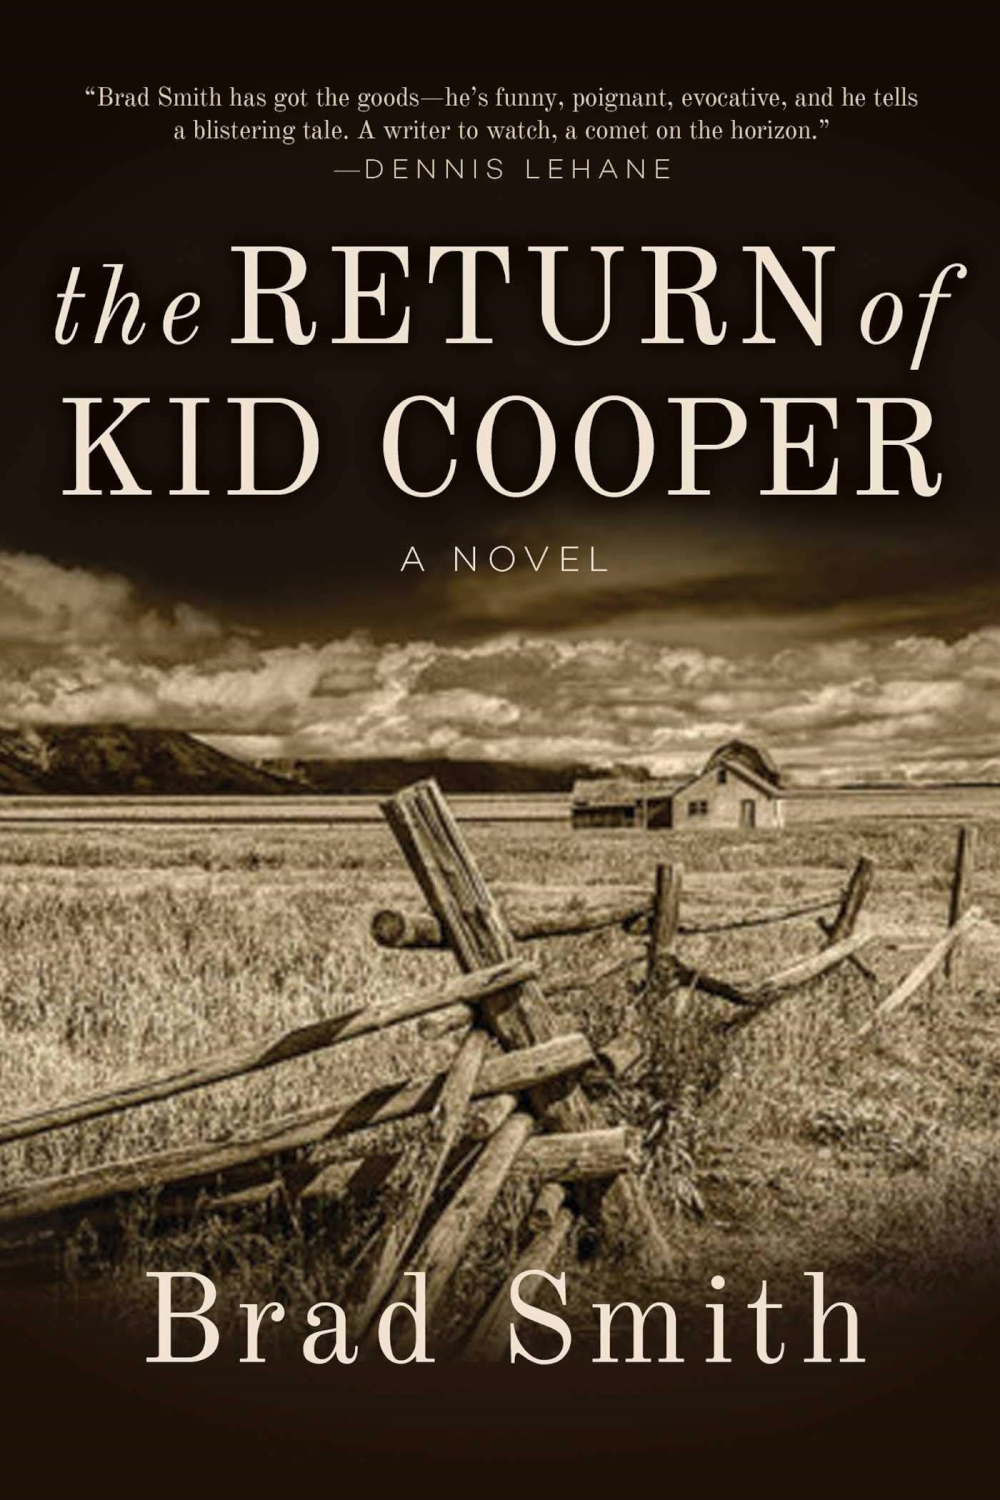 THE RETURN OF KID COOPER won the 2019 Spur Award from the Western Writers of America.